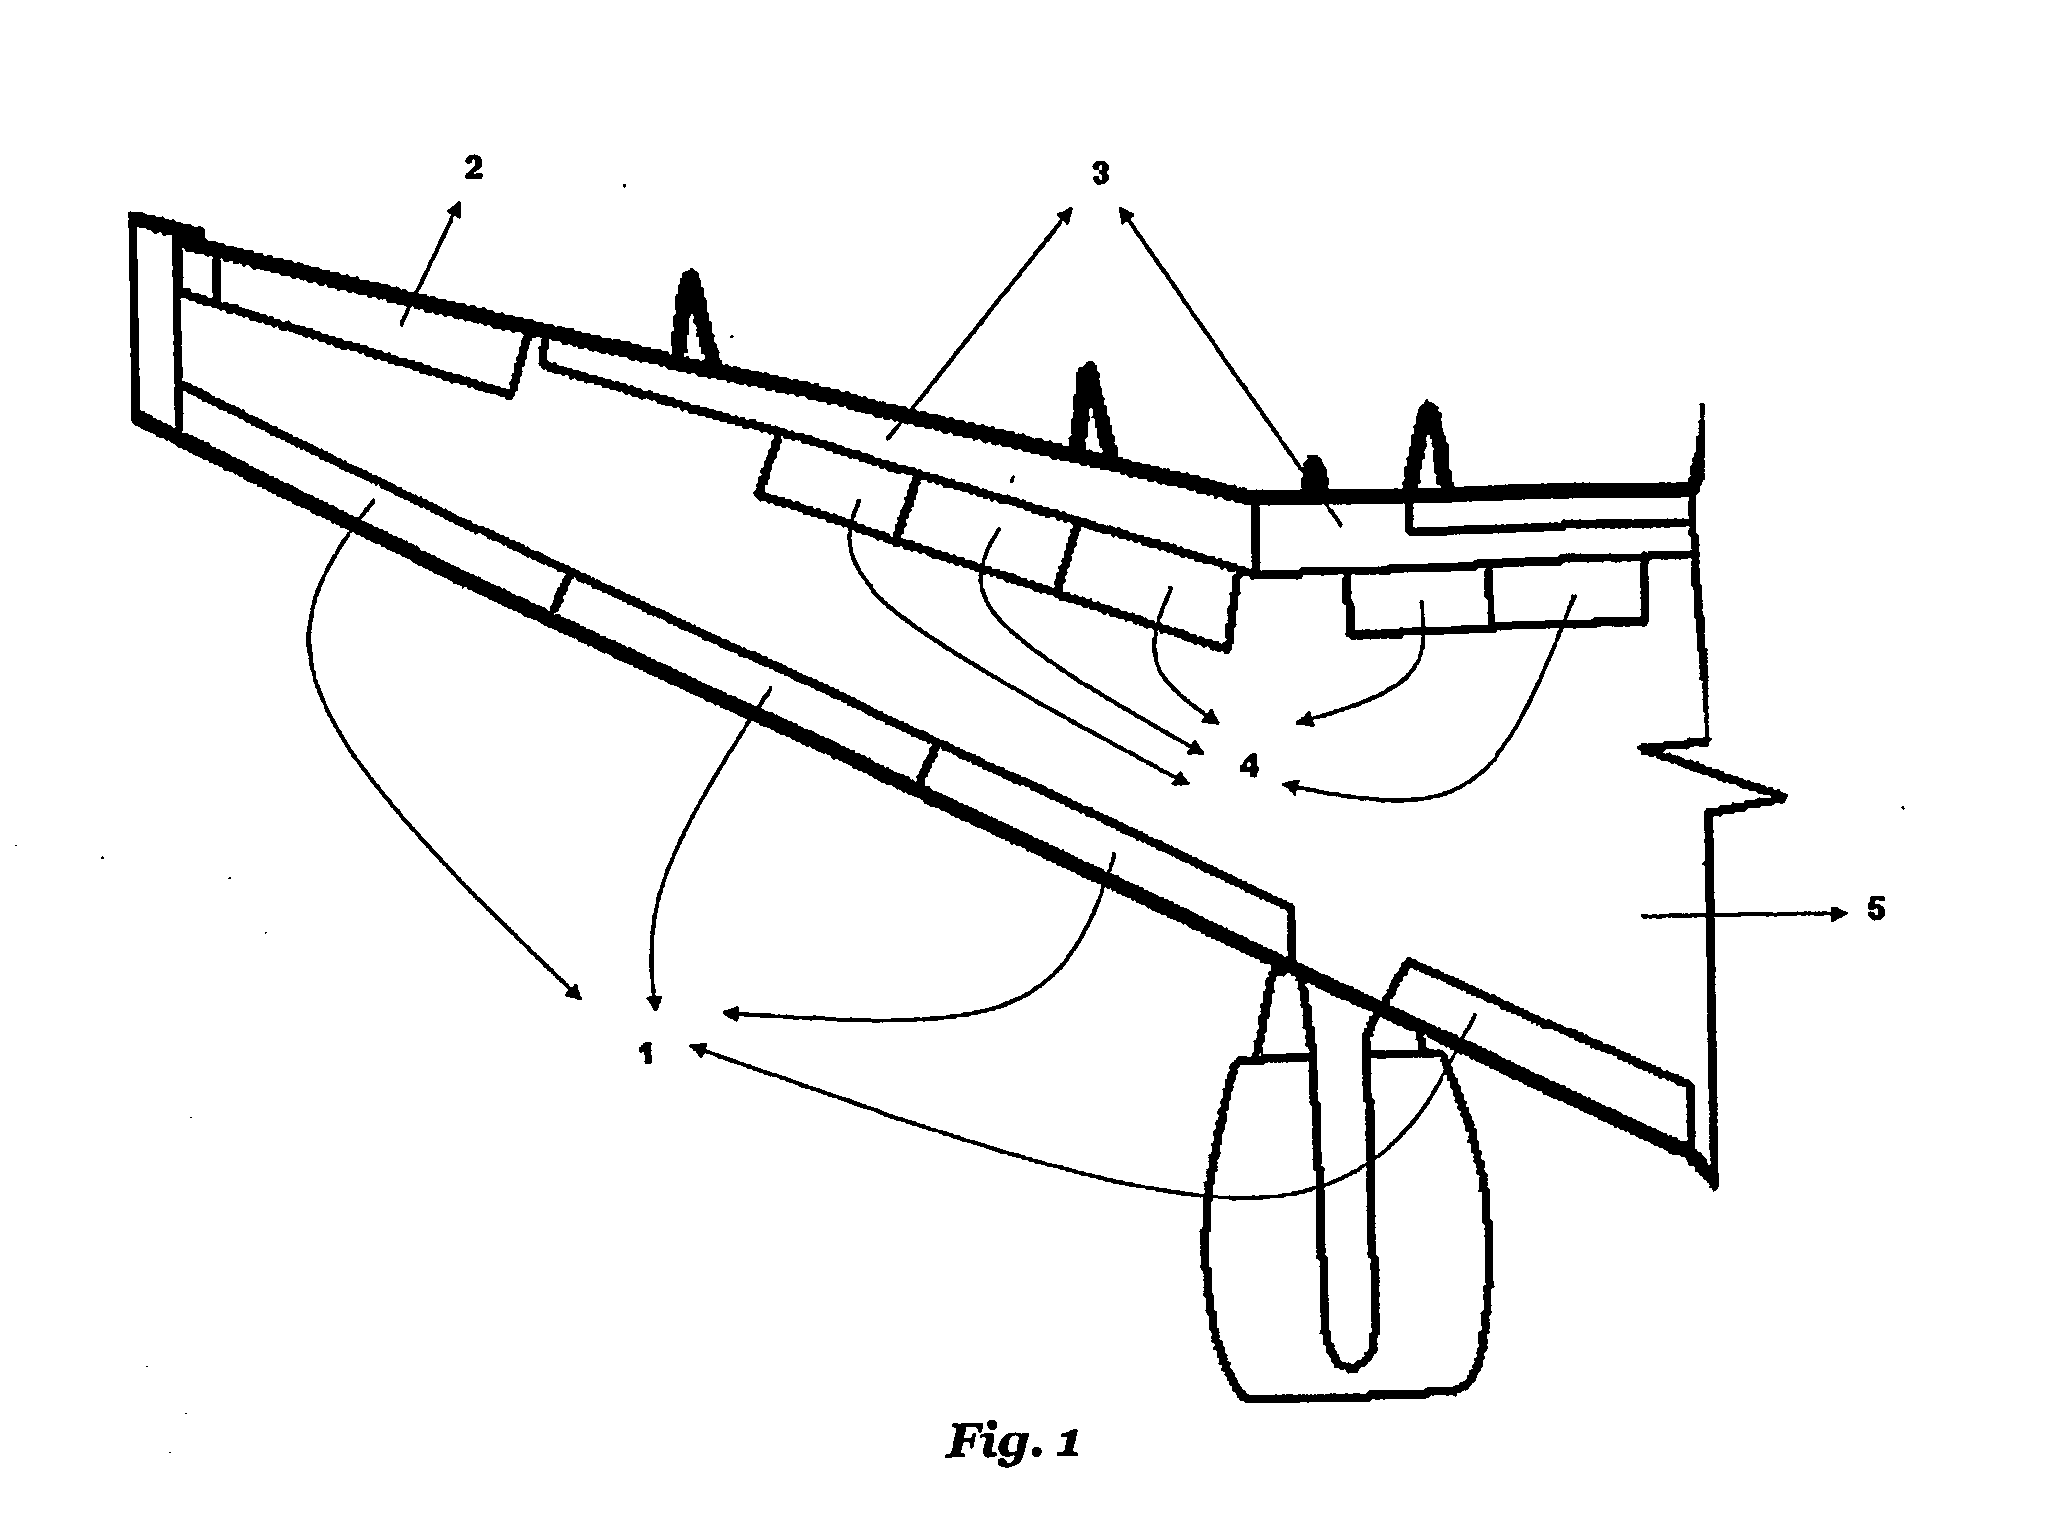 Aerodynamic seal for reduction of noise generated on aircraft control surfaces